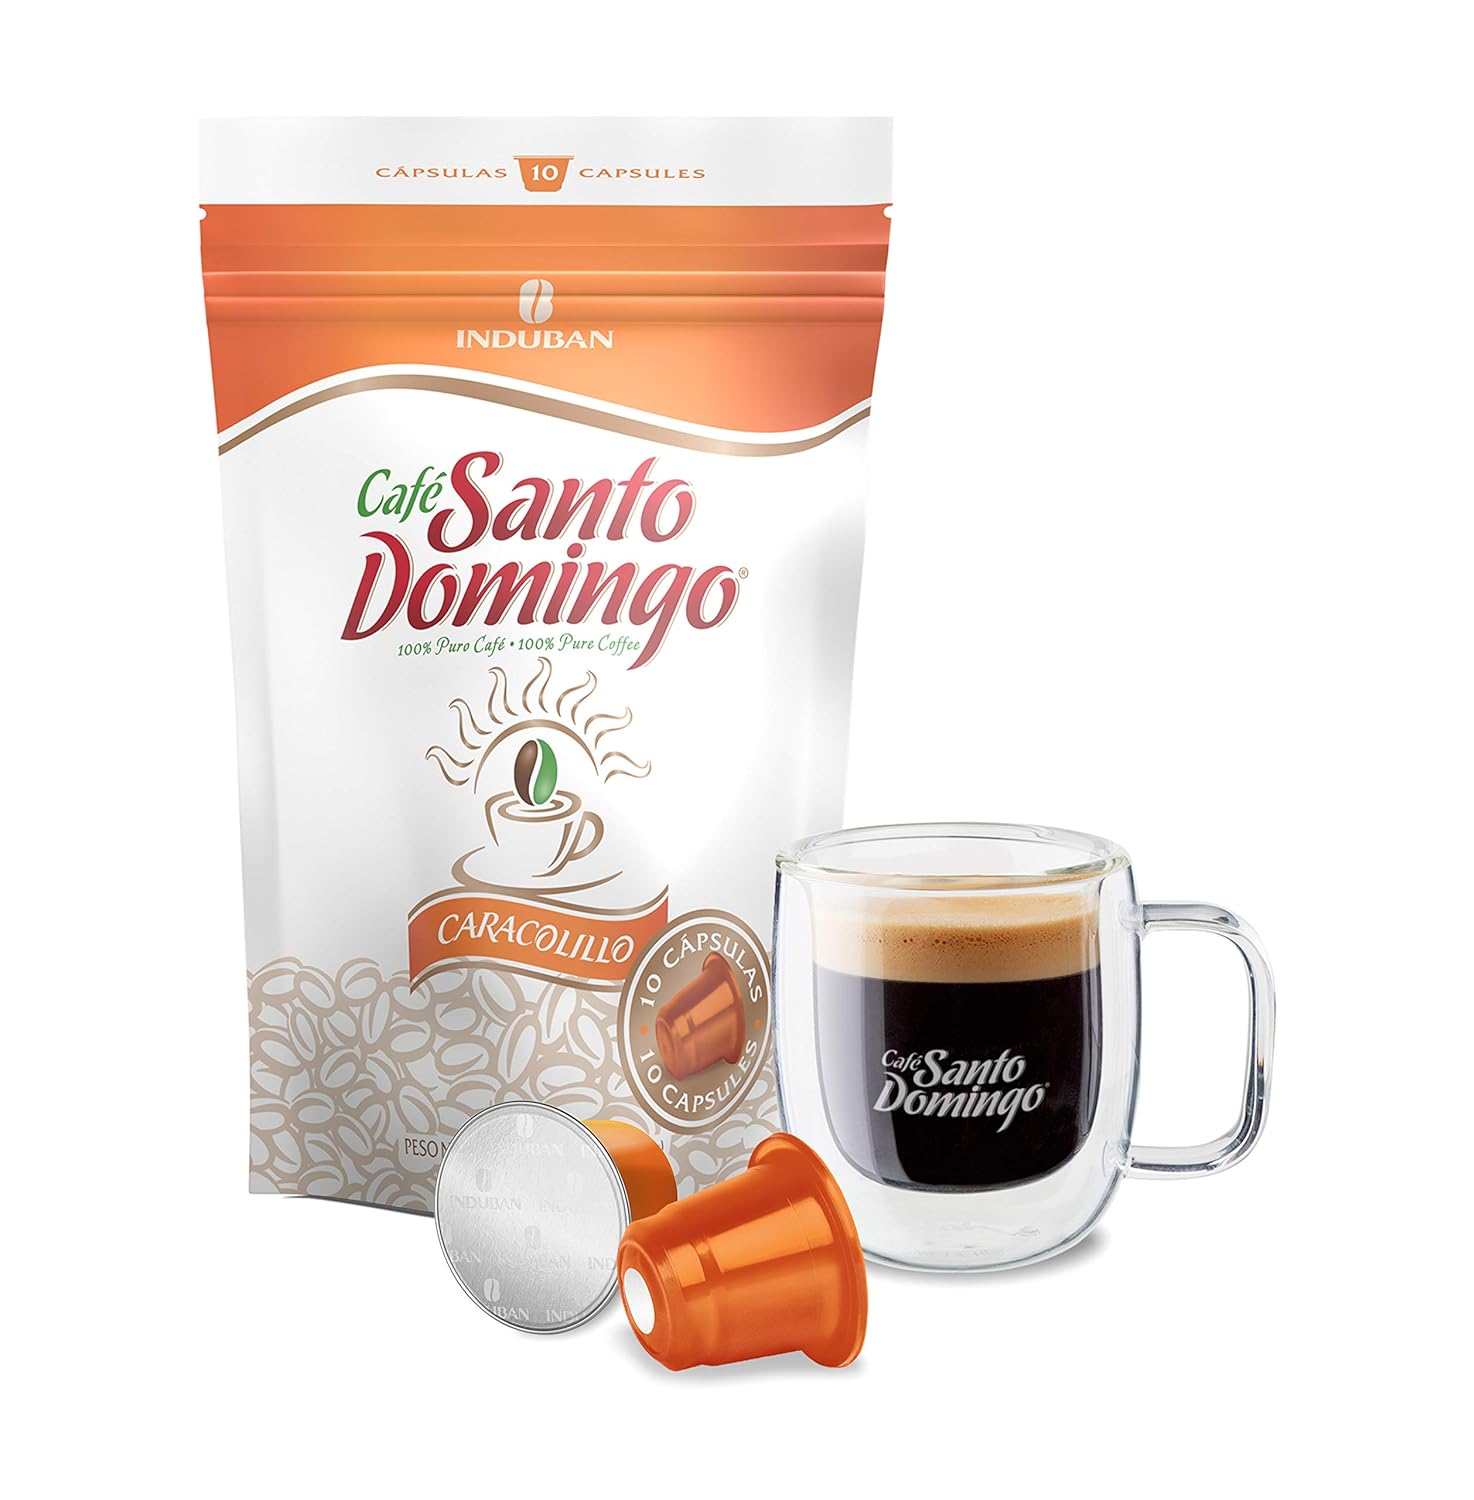 Santo Domingo Coffee Peaberry Capsules - Compatible with Nespresso Original Brewers - Product from the Dominican Republic (10 Count) : Grocery & Gourmet Food